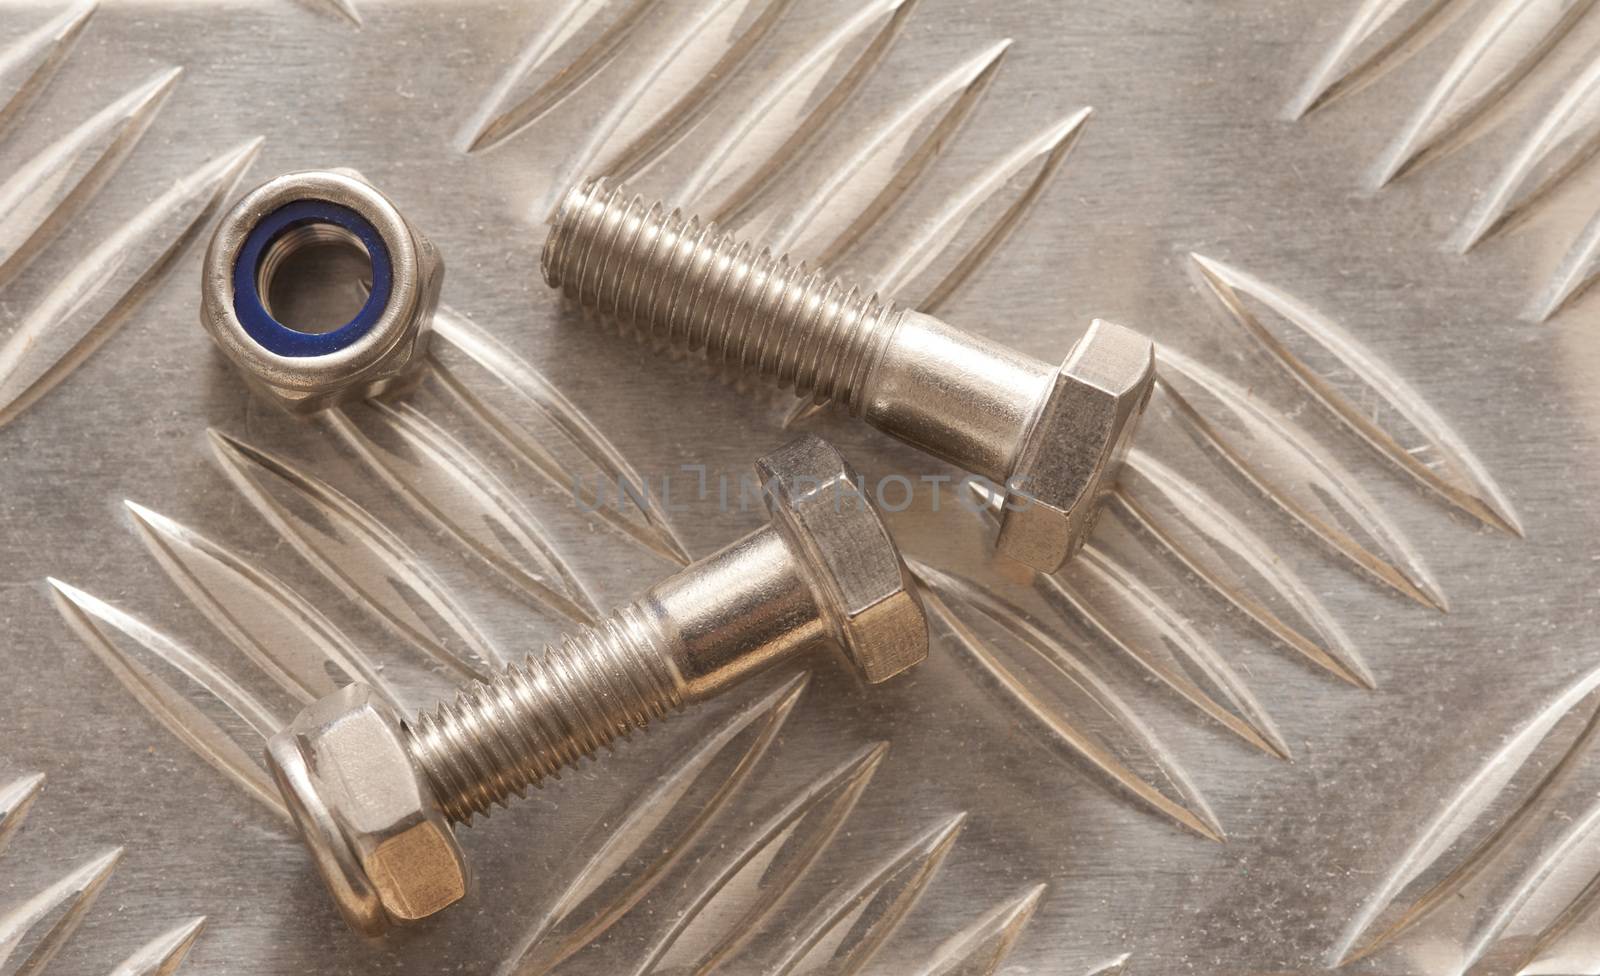 Precision Engineering Concept, Close-up view of two nut bolts over shiny anti-slip stainless steel metal surface